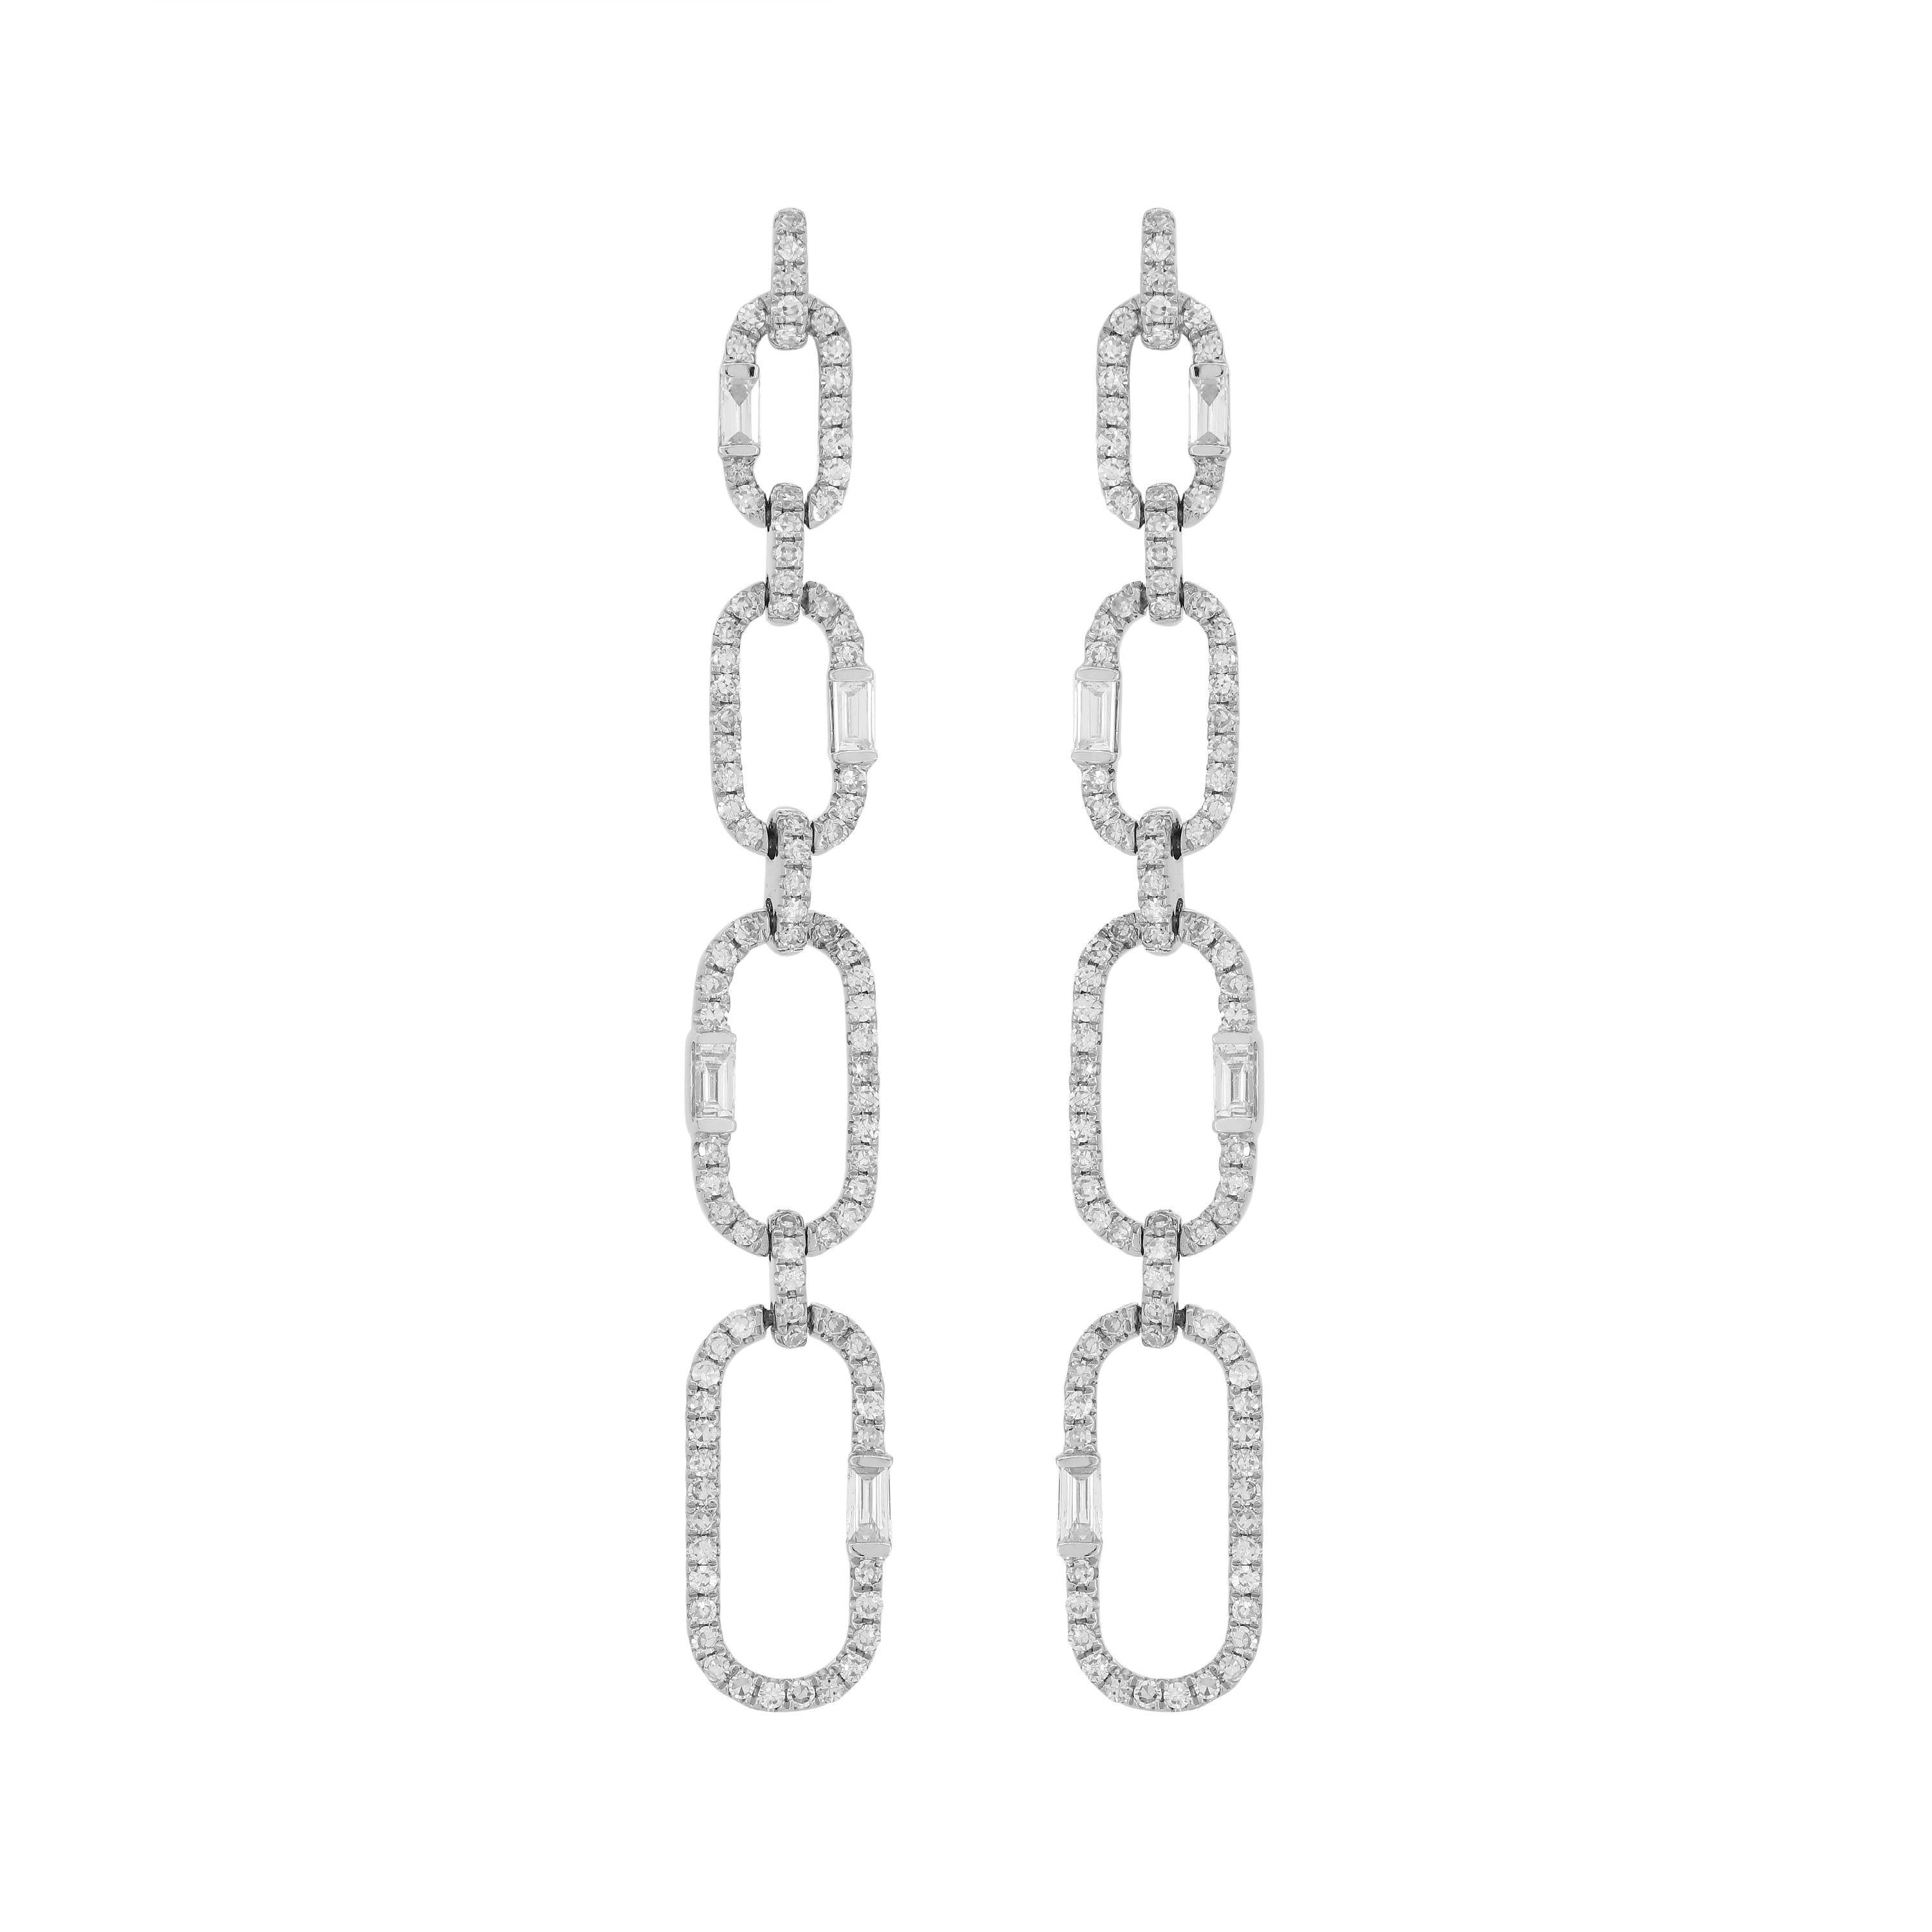 Fall in love with these Luxle artfully crafted earrings featuring baguettes and round diamonds in a graduating openwork design of shimmering links, set in 18K white gold.
Please follow the Luxury Jewels storefront to view the latest collections &